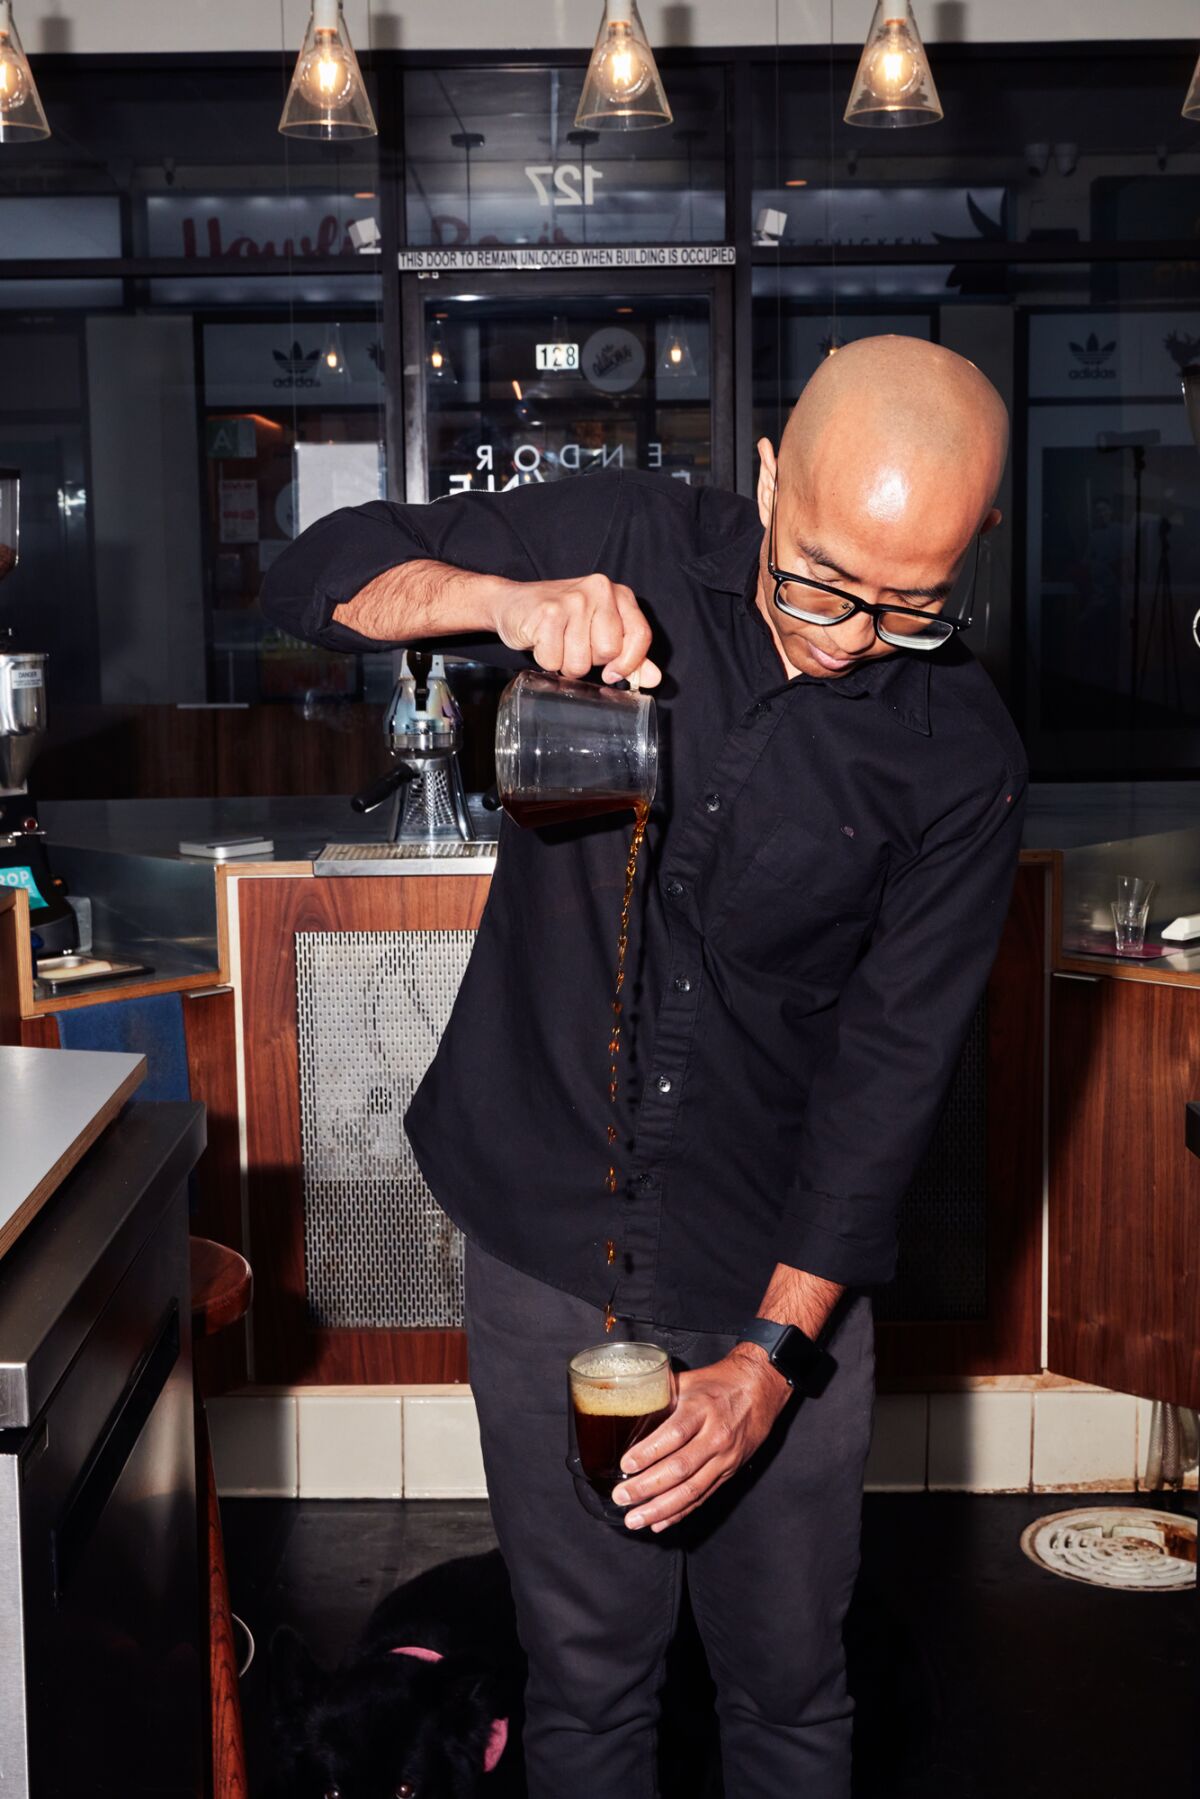 A man raises a hand high to pour into a coffee glass below.